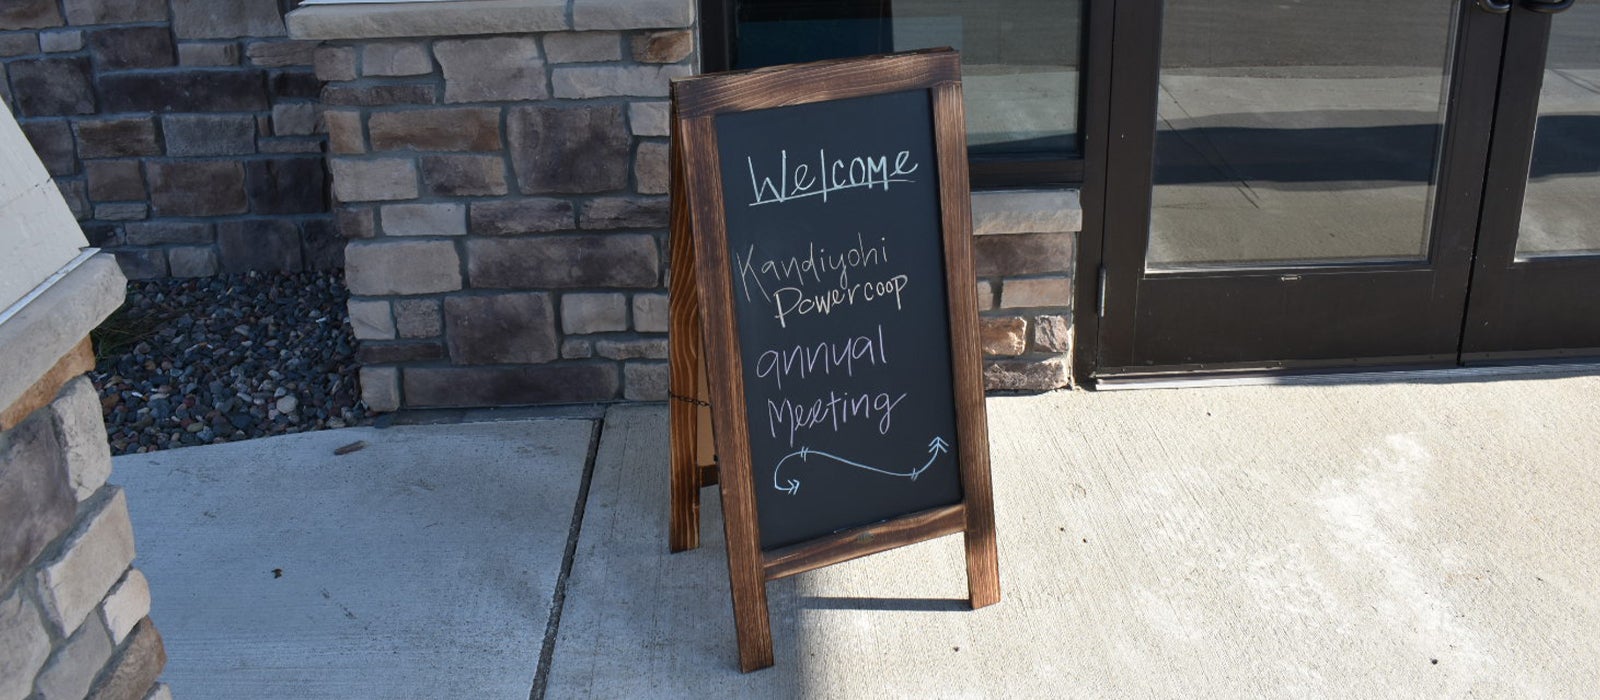 Annual Meeting Sign